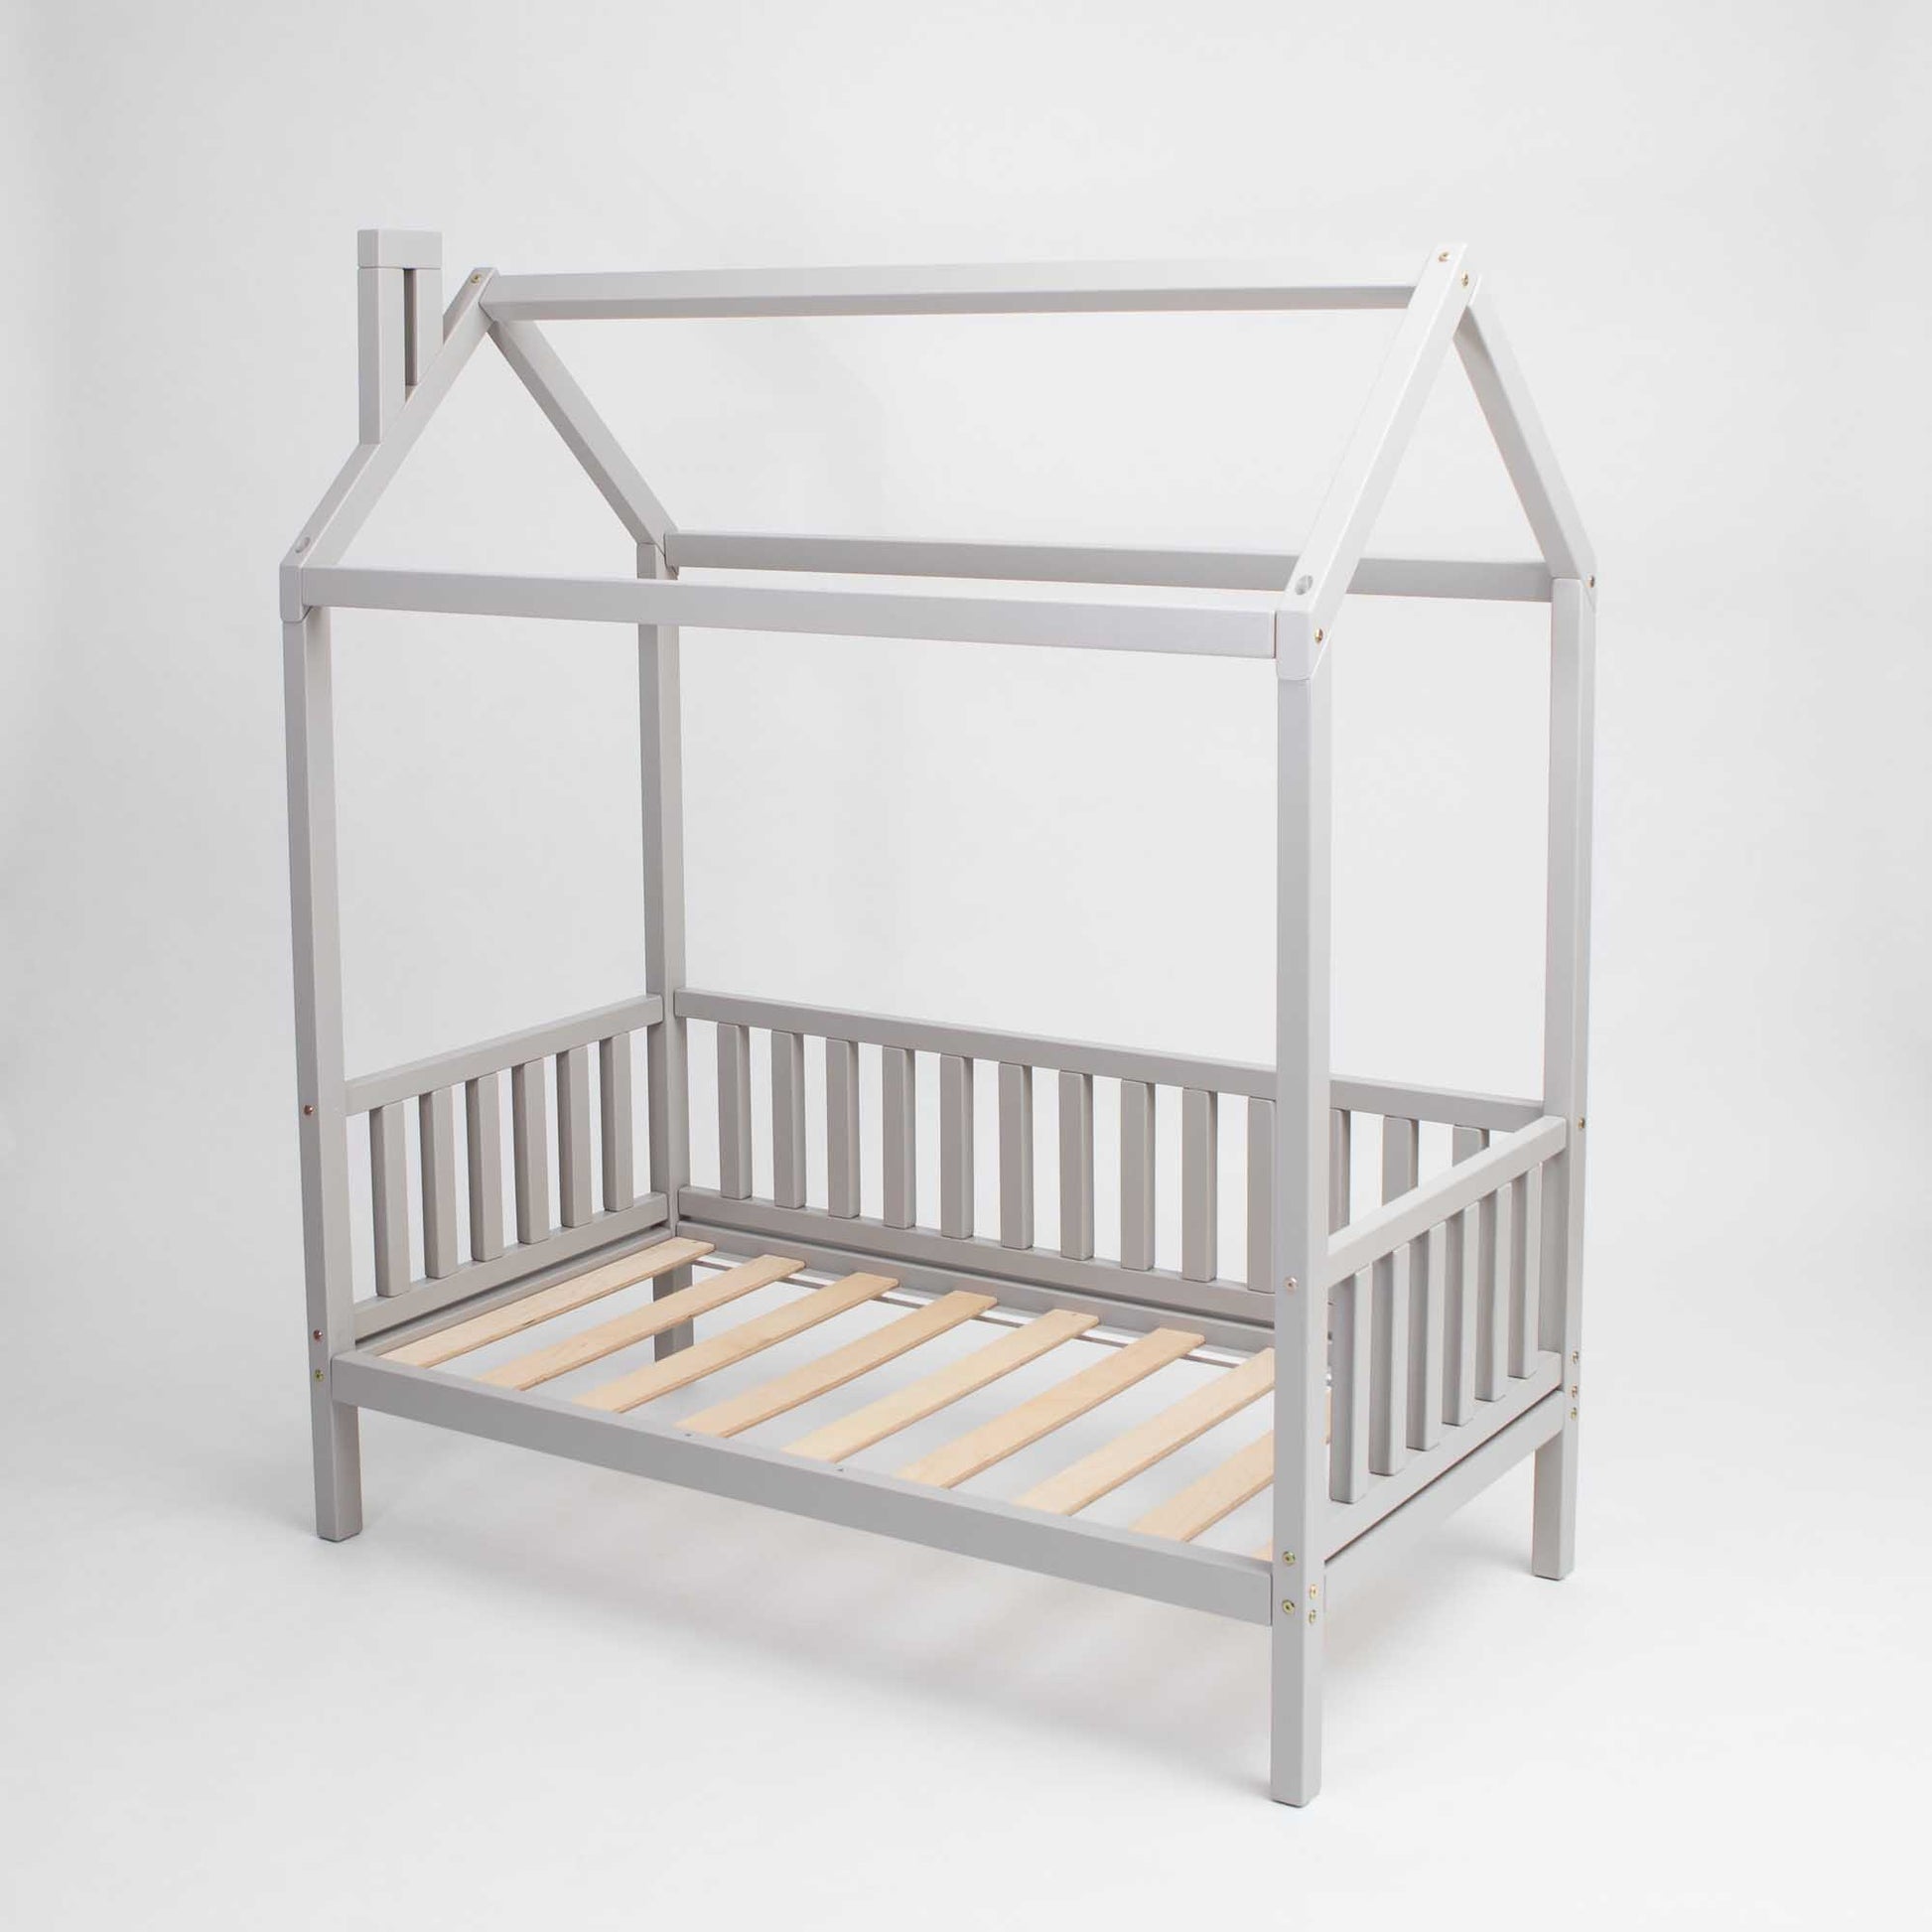 A grey-framed raised house bed on legs with 3-sided rails complete with wooden slats.